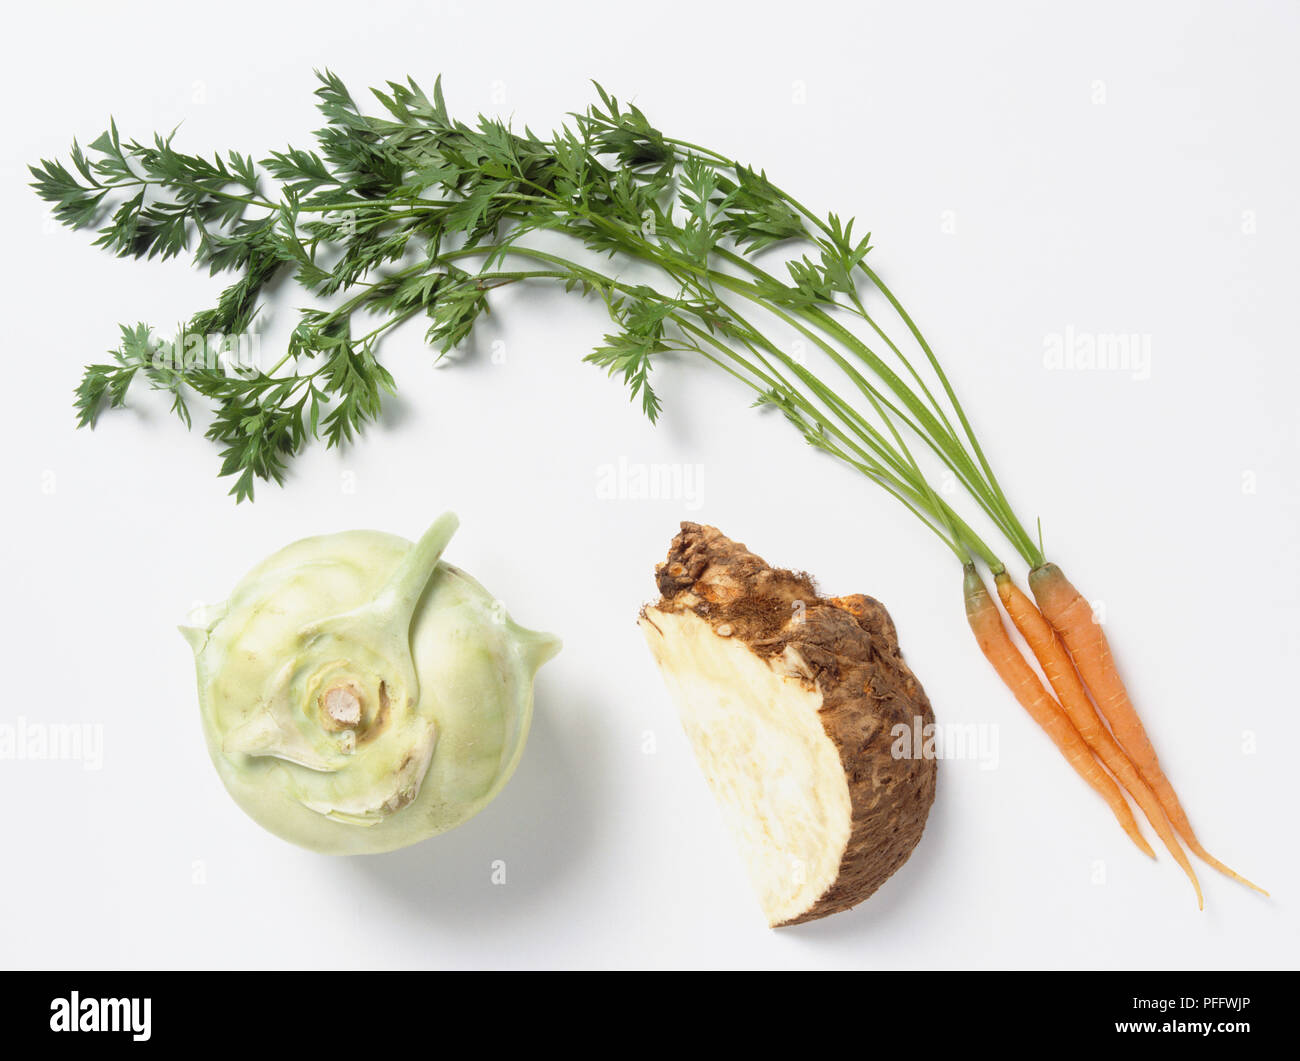 Kohlrabi, slice of celeriac and three carrots with stems still attached, view from above Stock Photo